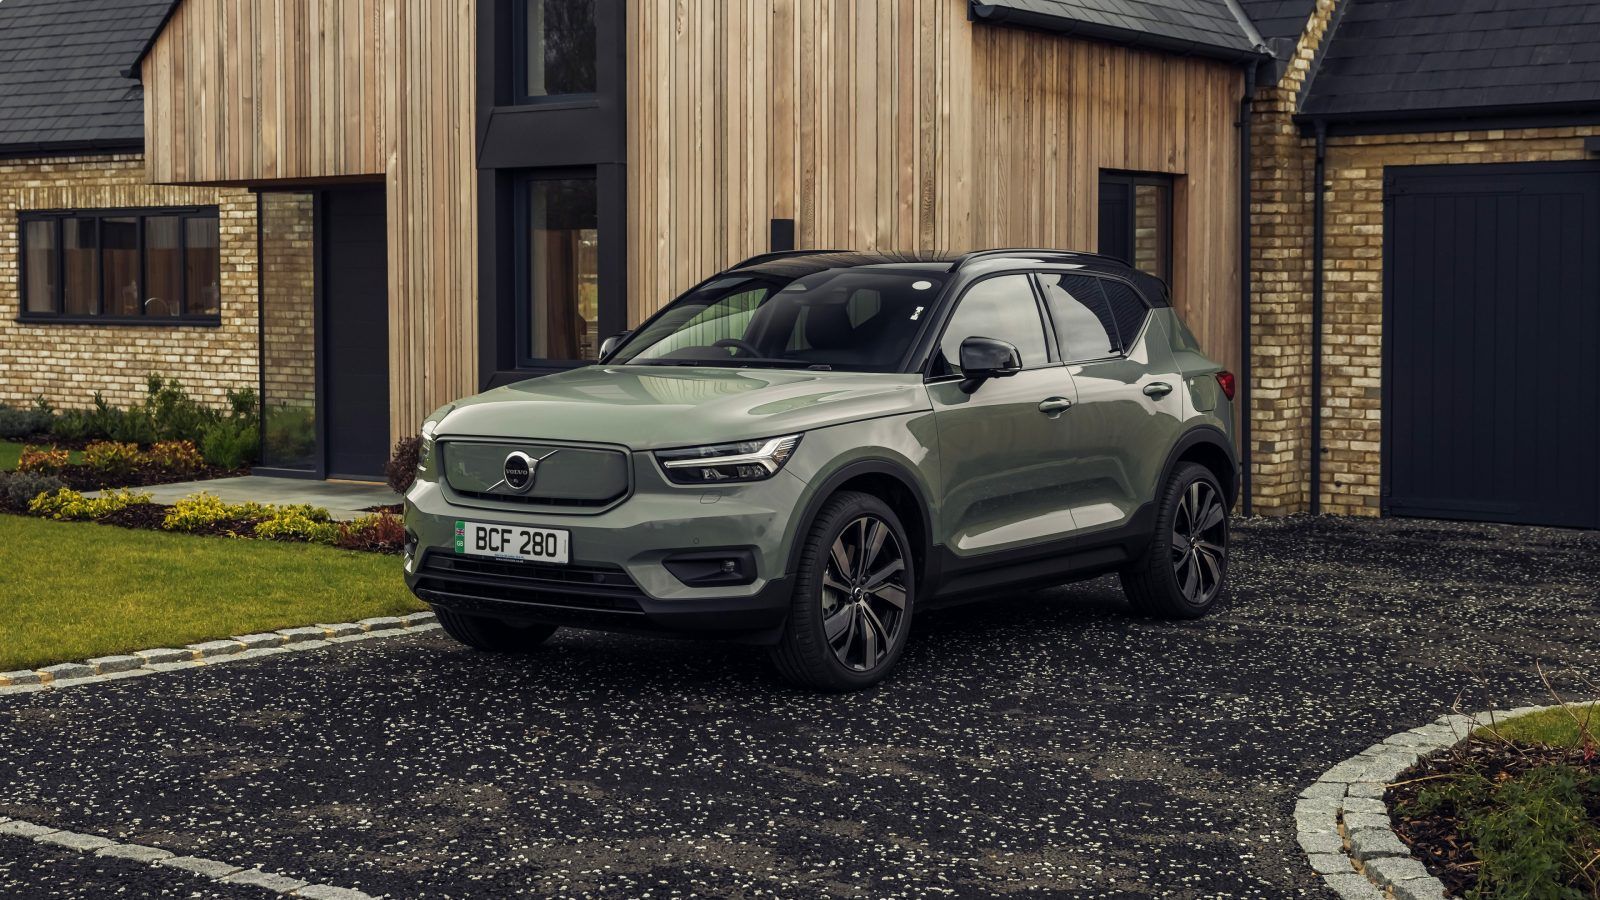 https://images.lifestyleasia.com/wp-content/uploads/sites/7/2022/07/26215043/volvo_xc40_recharge_p8_awd_2021_4k-3840x2160-1-1600x900.jpg